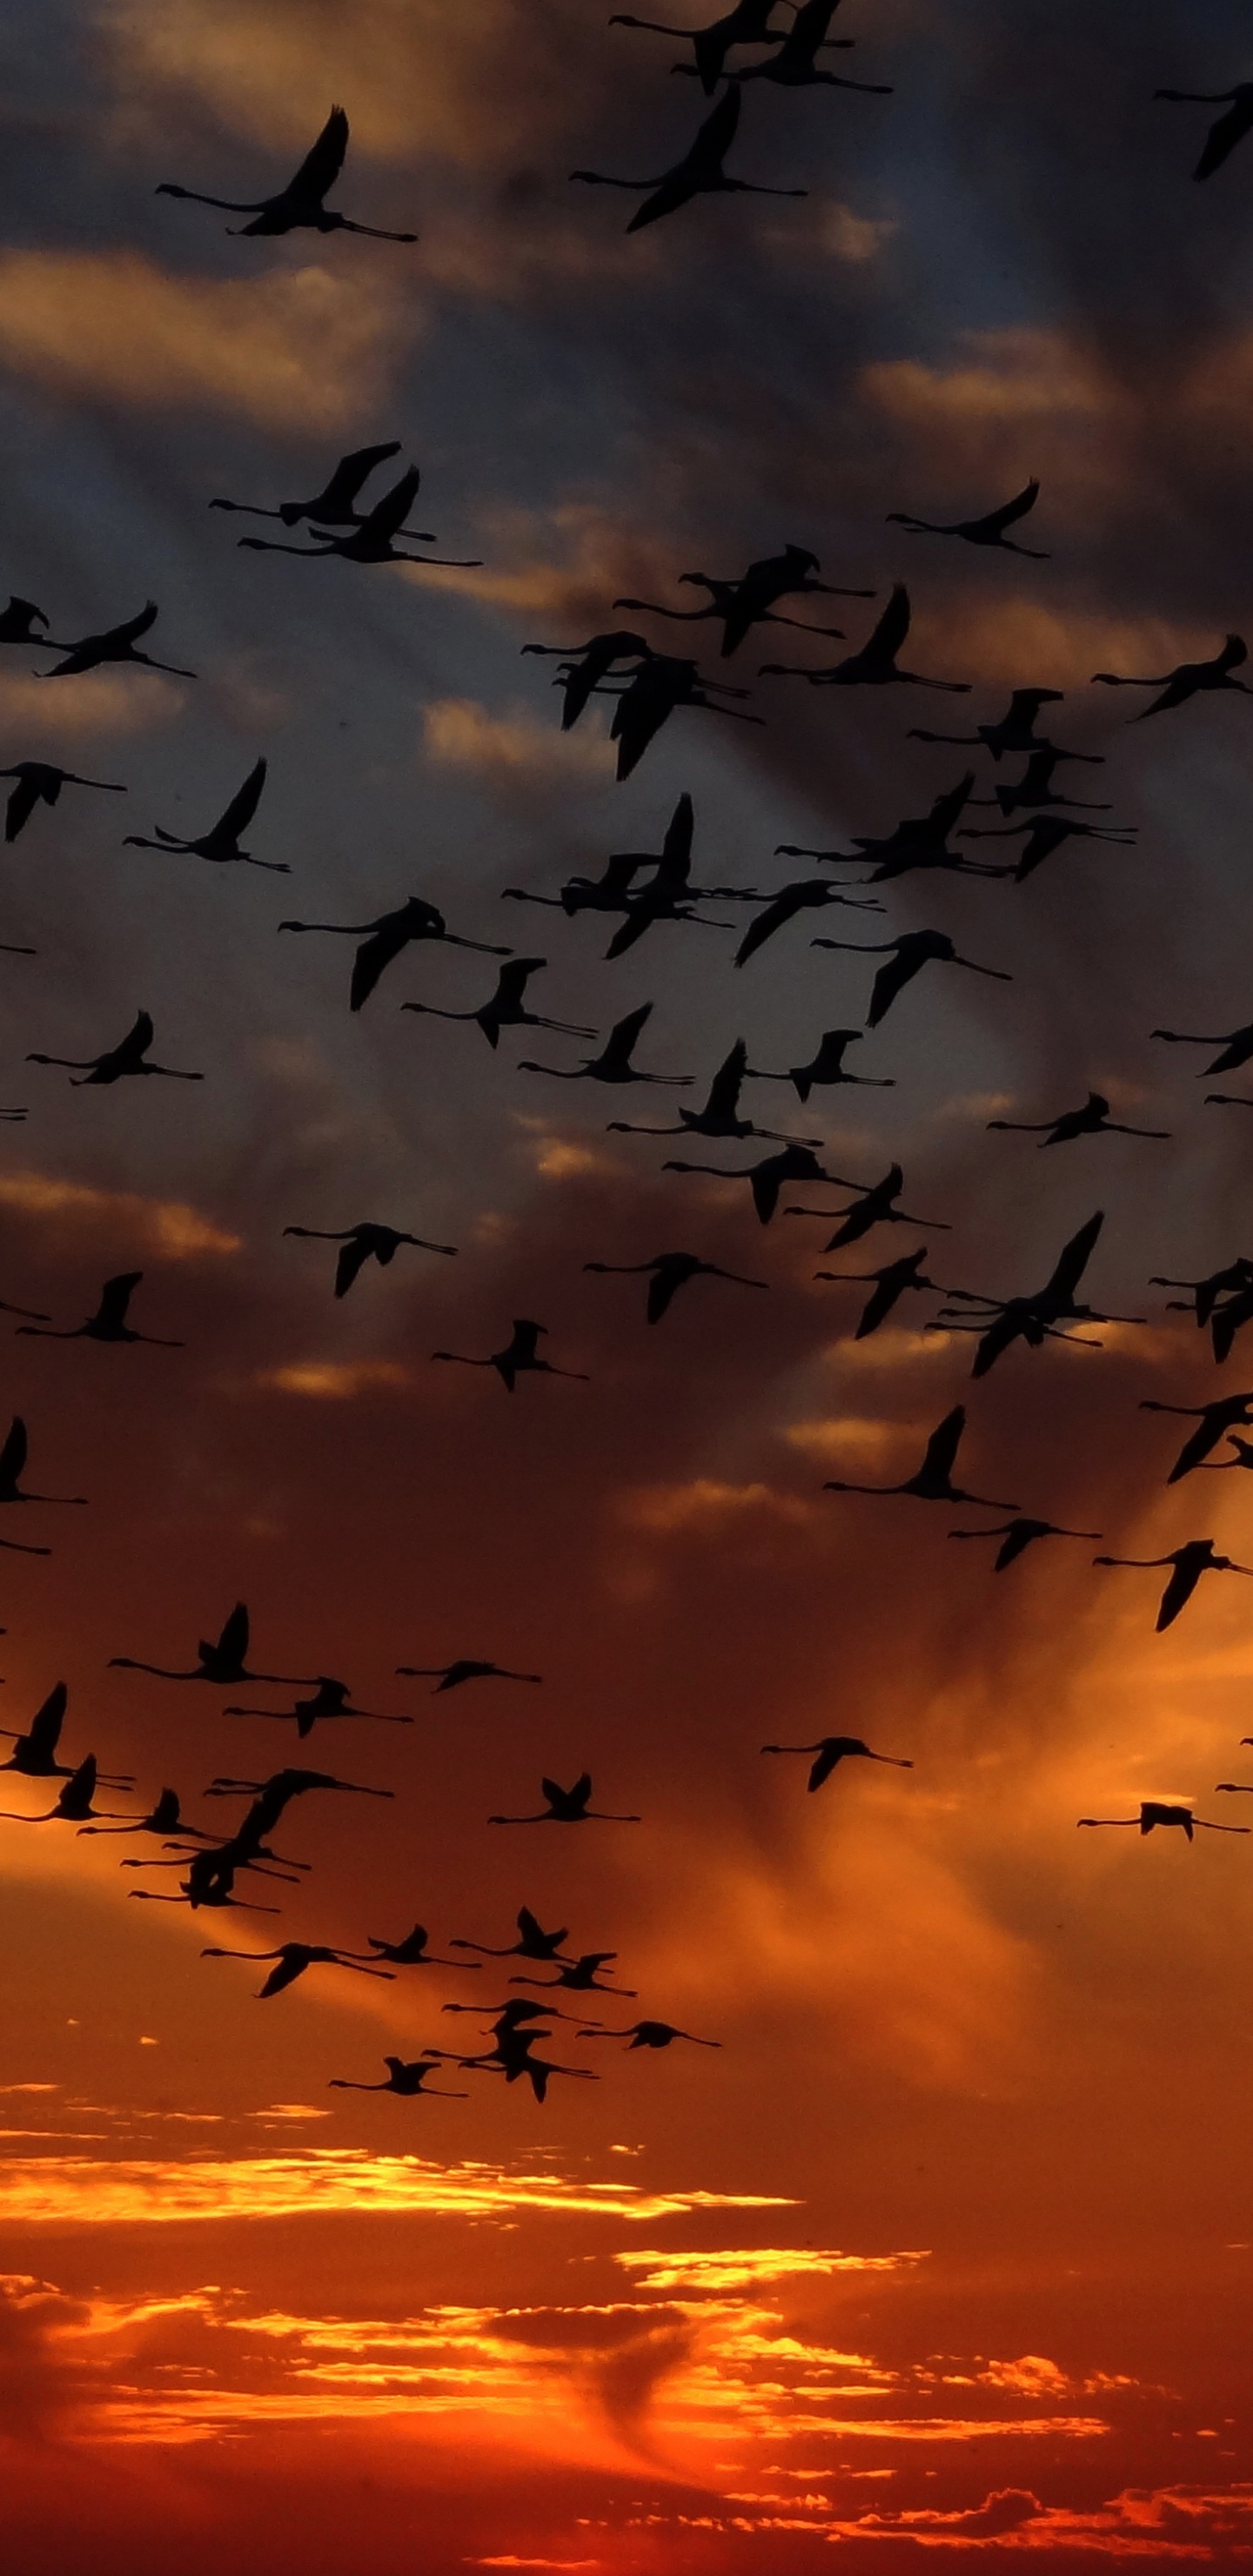 Silhouette of Flock of Birds Flying During Sunset. Wallpaper in 1440x2960 Resolution